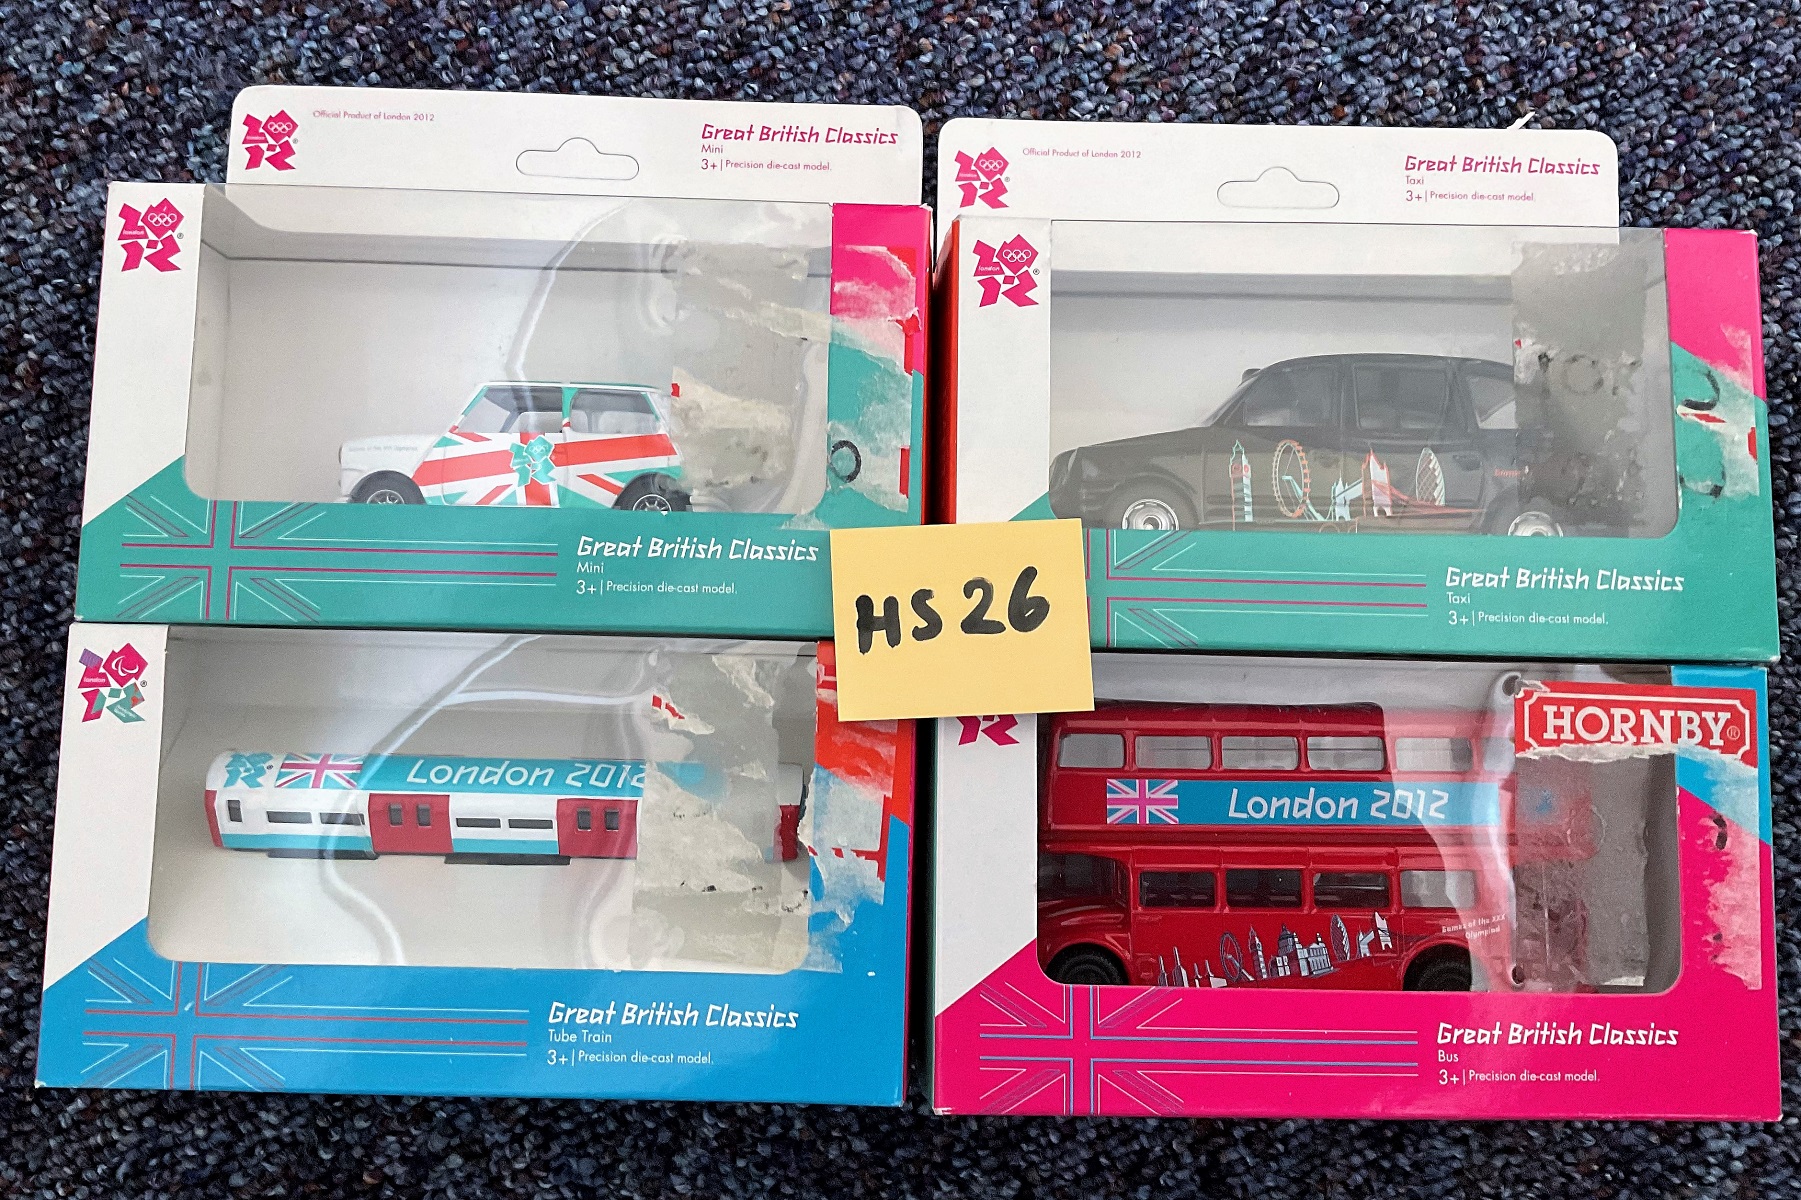 Vintage Toys. London 2012 Olympics, Great British Classics. A Collection of 2012 Olympic Die-cast